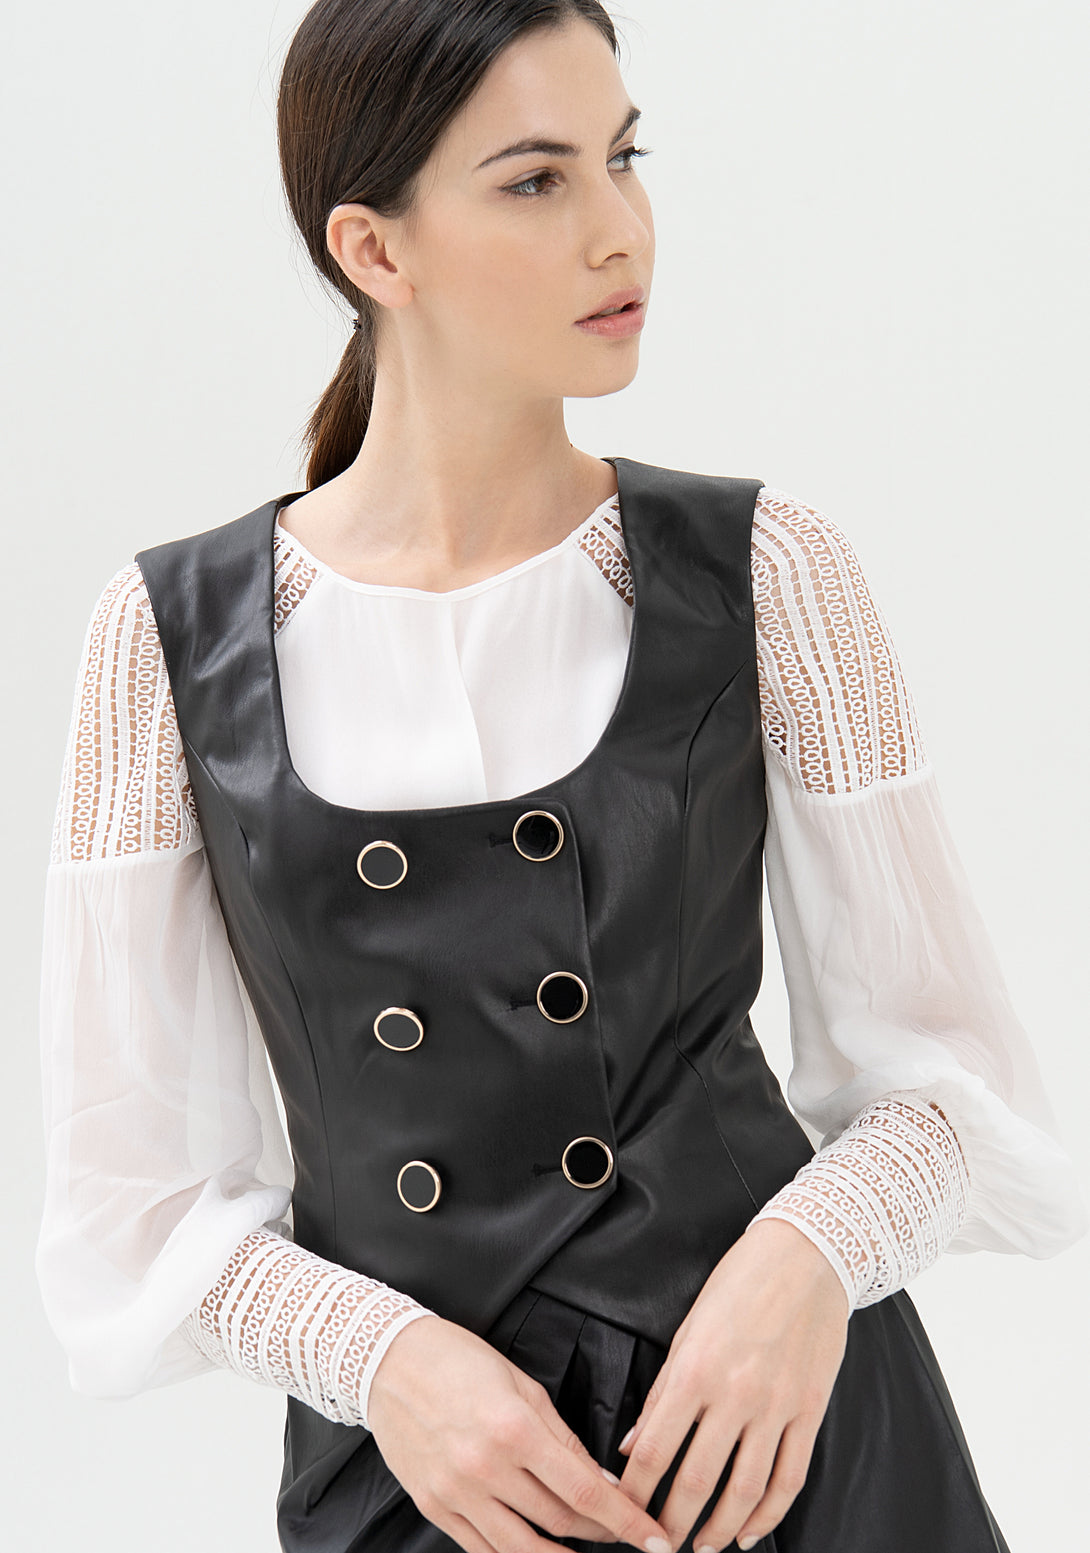 Gilet cropped tight fit made in eco leather